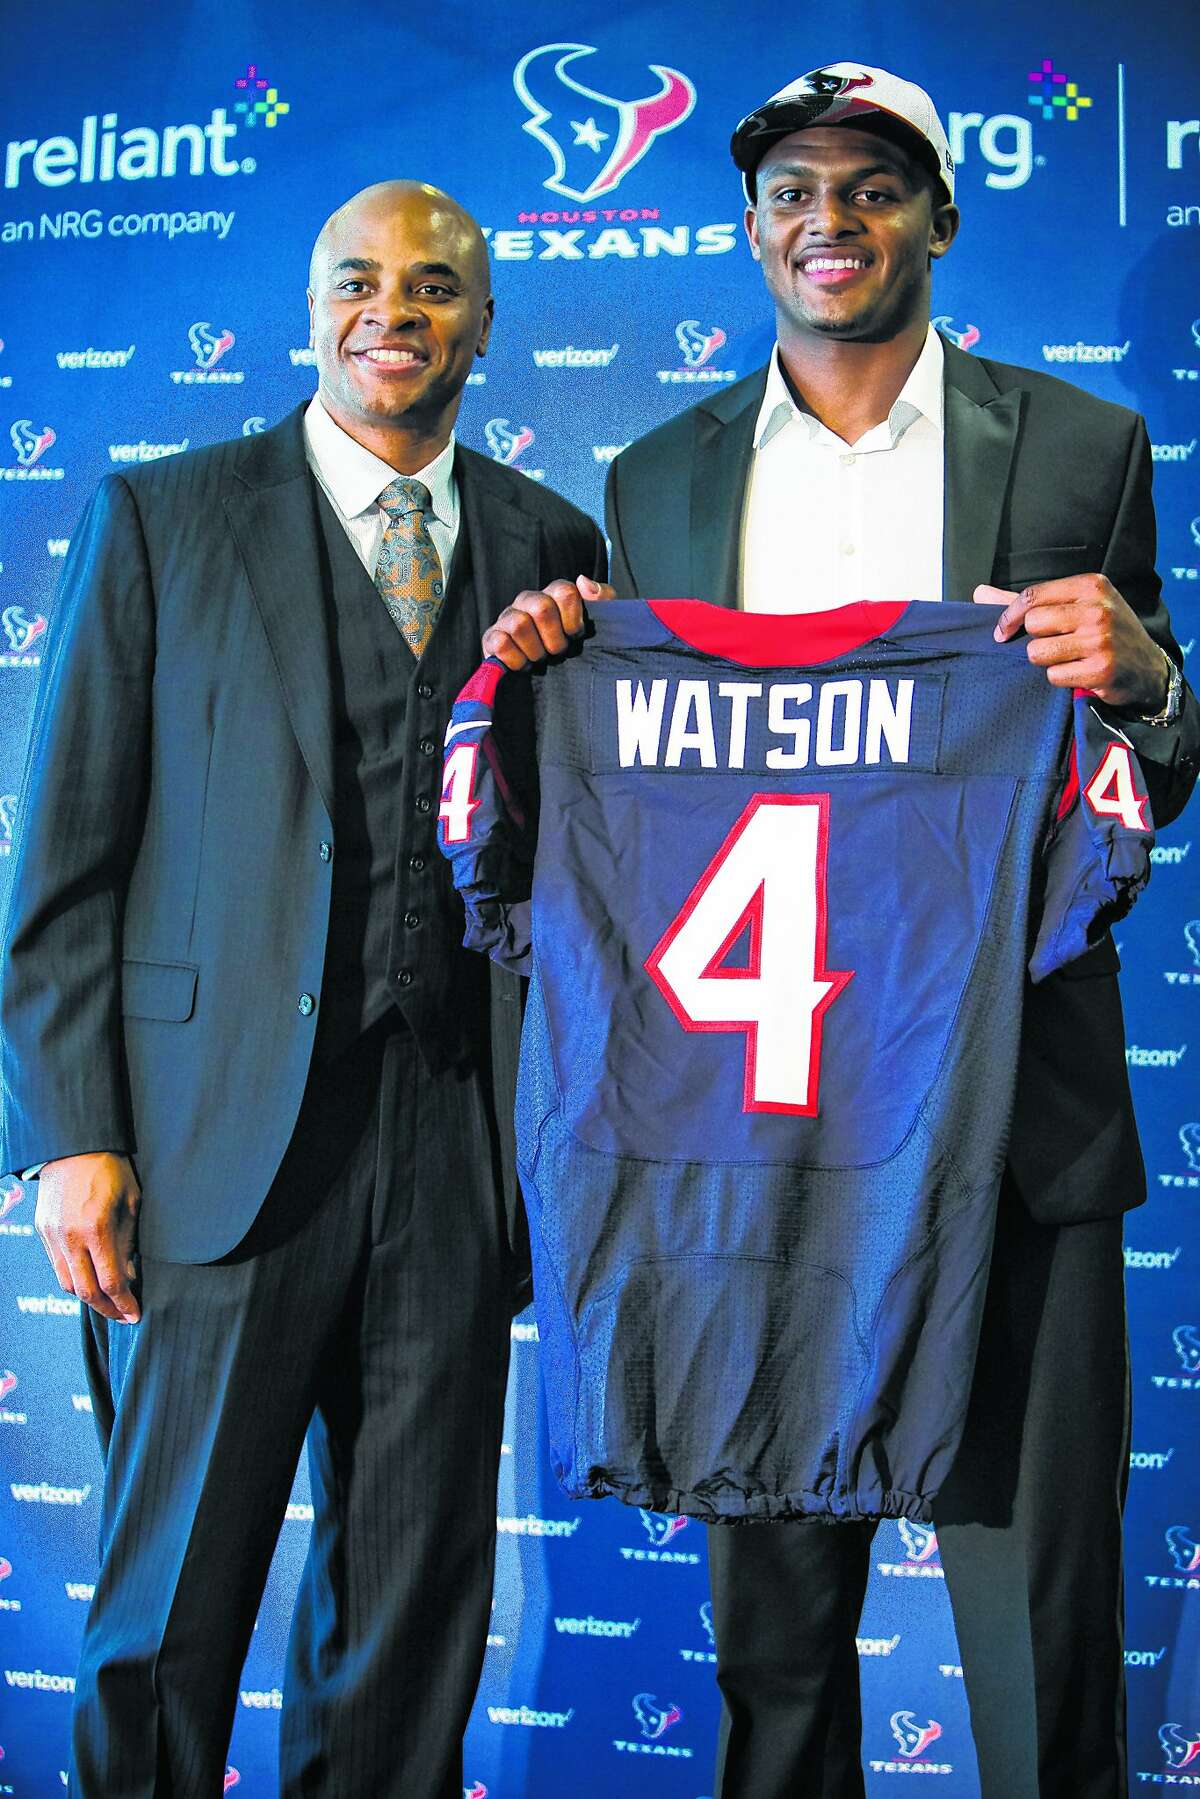 16. Over a decade later, a franchise quarterback arrives Up until this point, the Texans had spent its entire existence in search of a franchise quarterback. After almost two decades of hunting, general manager Rick Smith surrendered a significant haul to the Cleveland Browns in order to trade up and acquire Deshaun Watson in the first round. Injures aside, Watson has mostly dazzled in the role and become one of the faces of the franchise that is still in search of its first championship. 